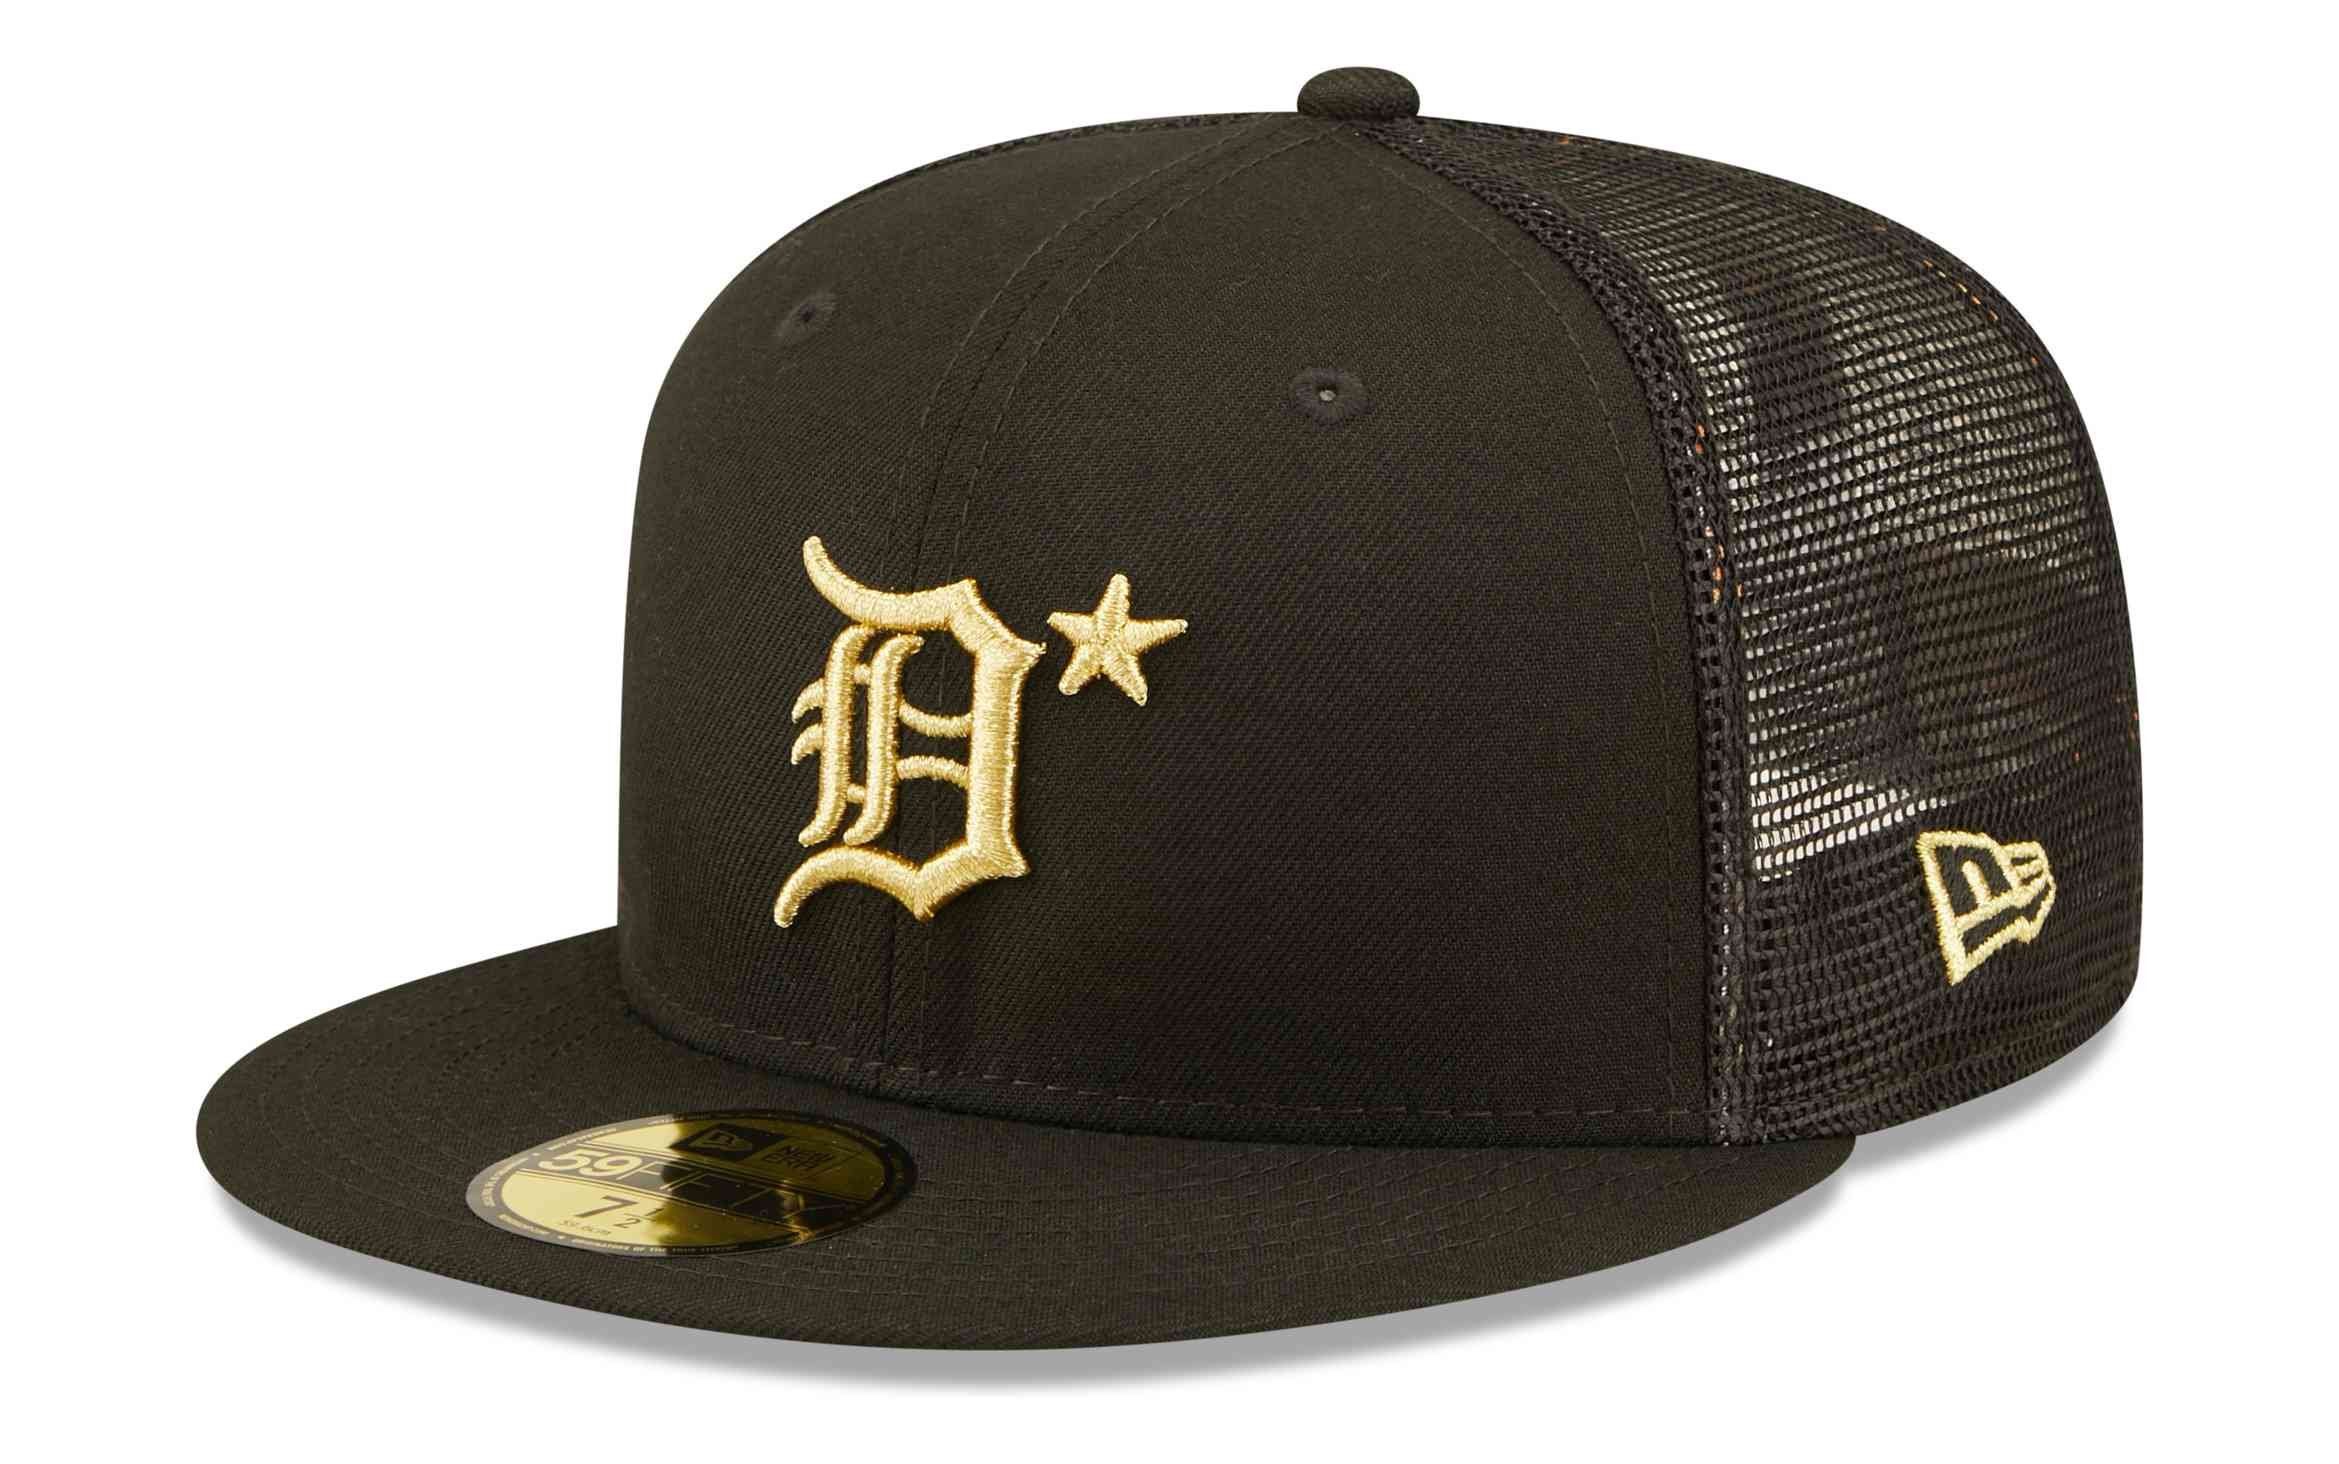 New Era Fitted Cap MLB Detroit Tigers All Star Game Patch 59Fifty